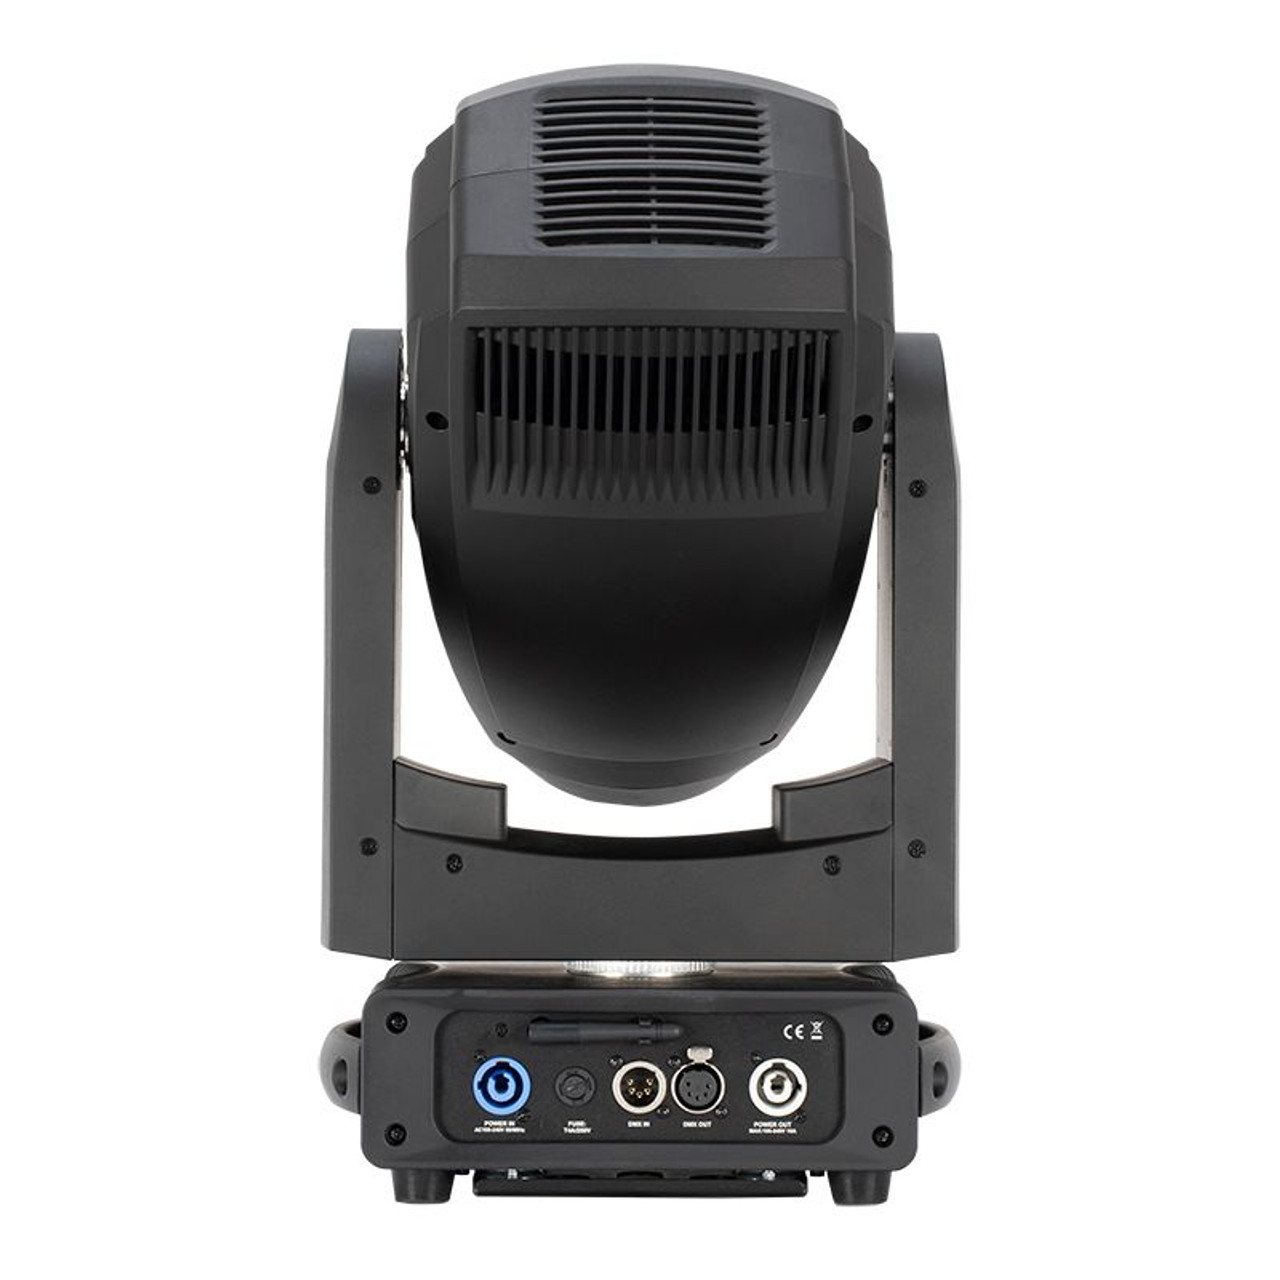 ADJ FOCUS HYBRID 200W Moving-Head LED Gobo Projector with Wired Network (FOC302)